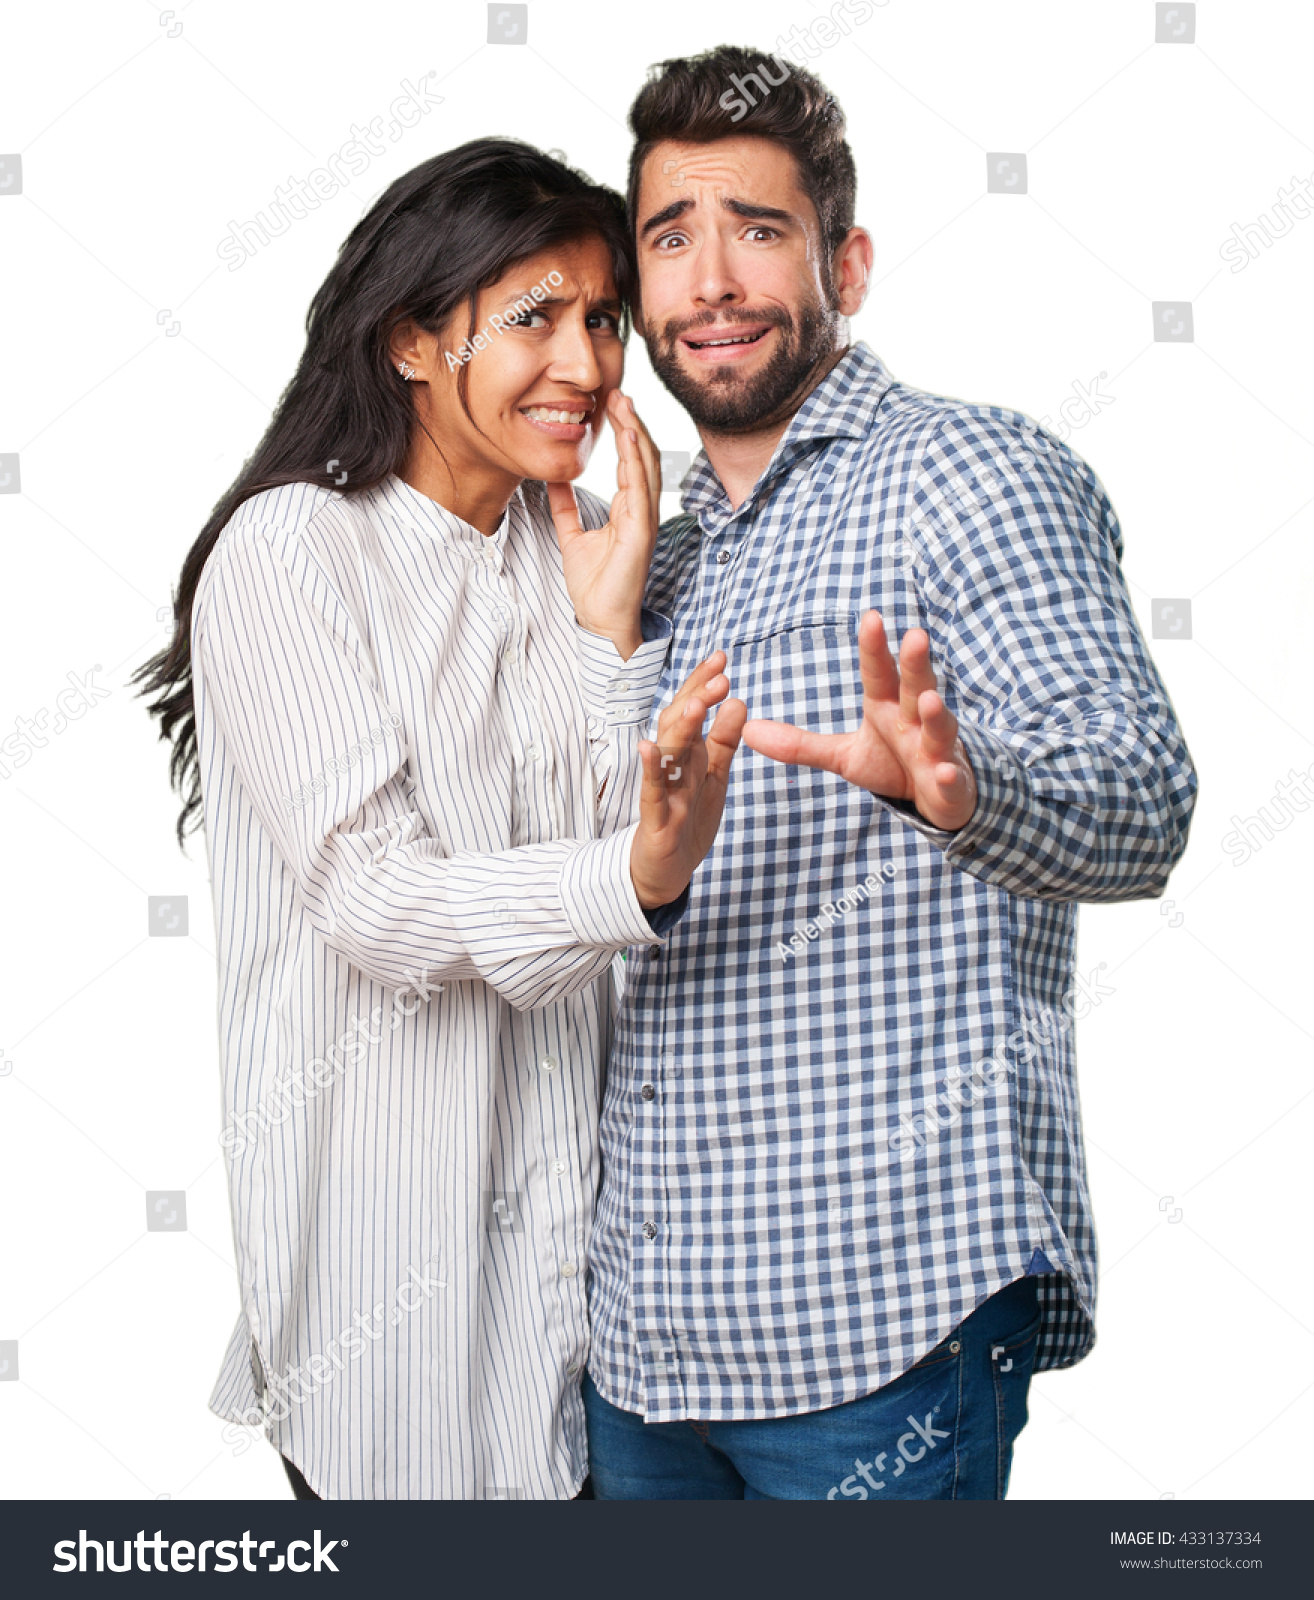 Scared Couple On White Stock Photo 433137334 - Shutterstock